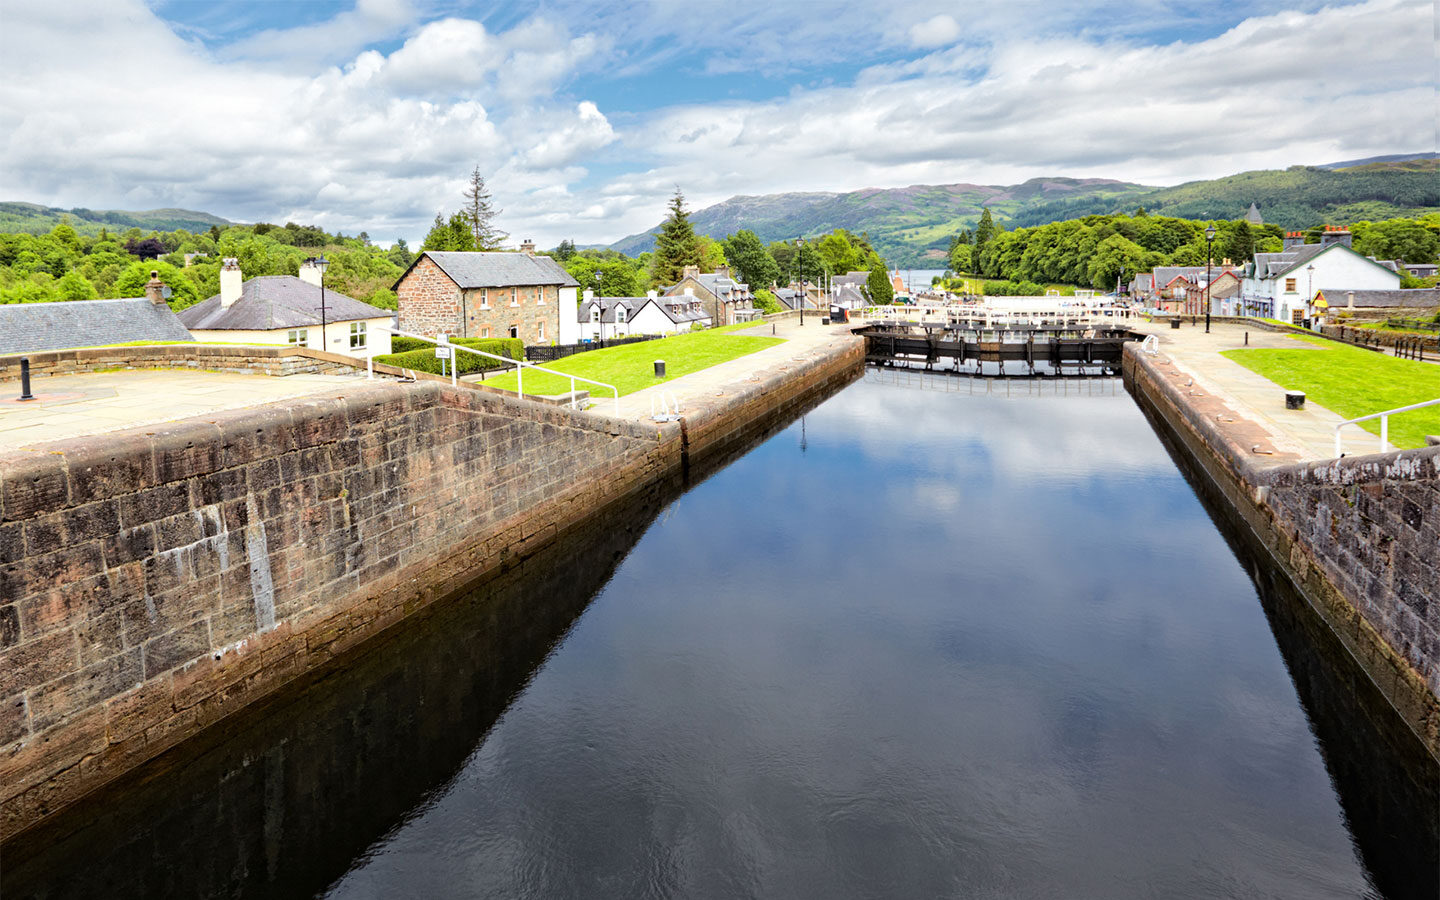 Locks on the Caledonian Canal in Fort Augustus